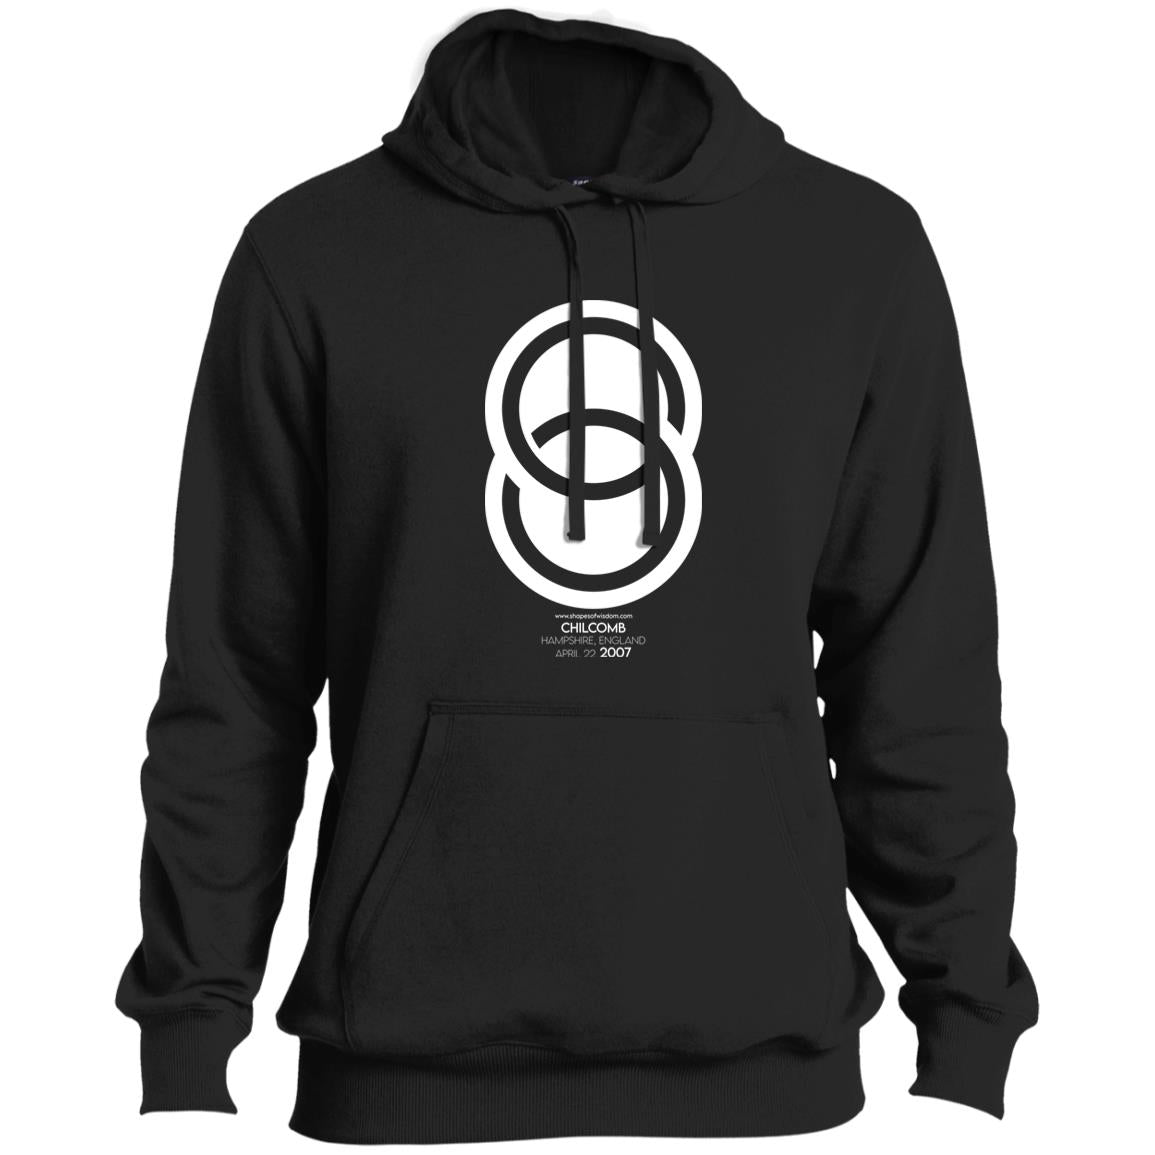 Crop Circle Pullover Hoodie - Chilcomb 3